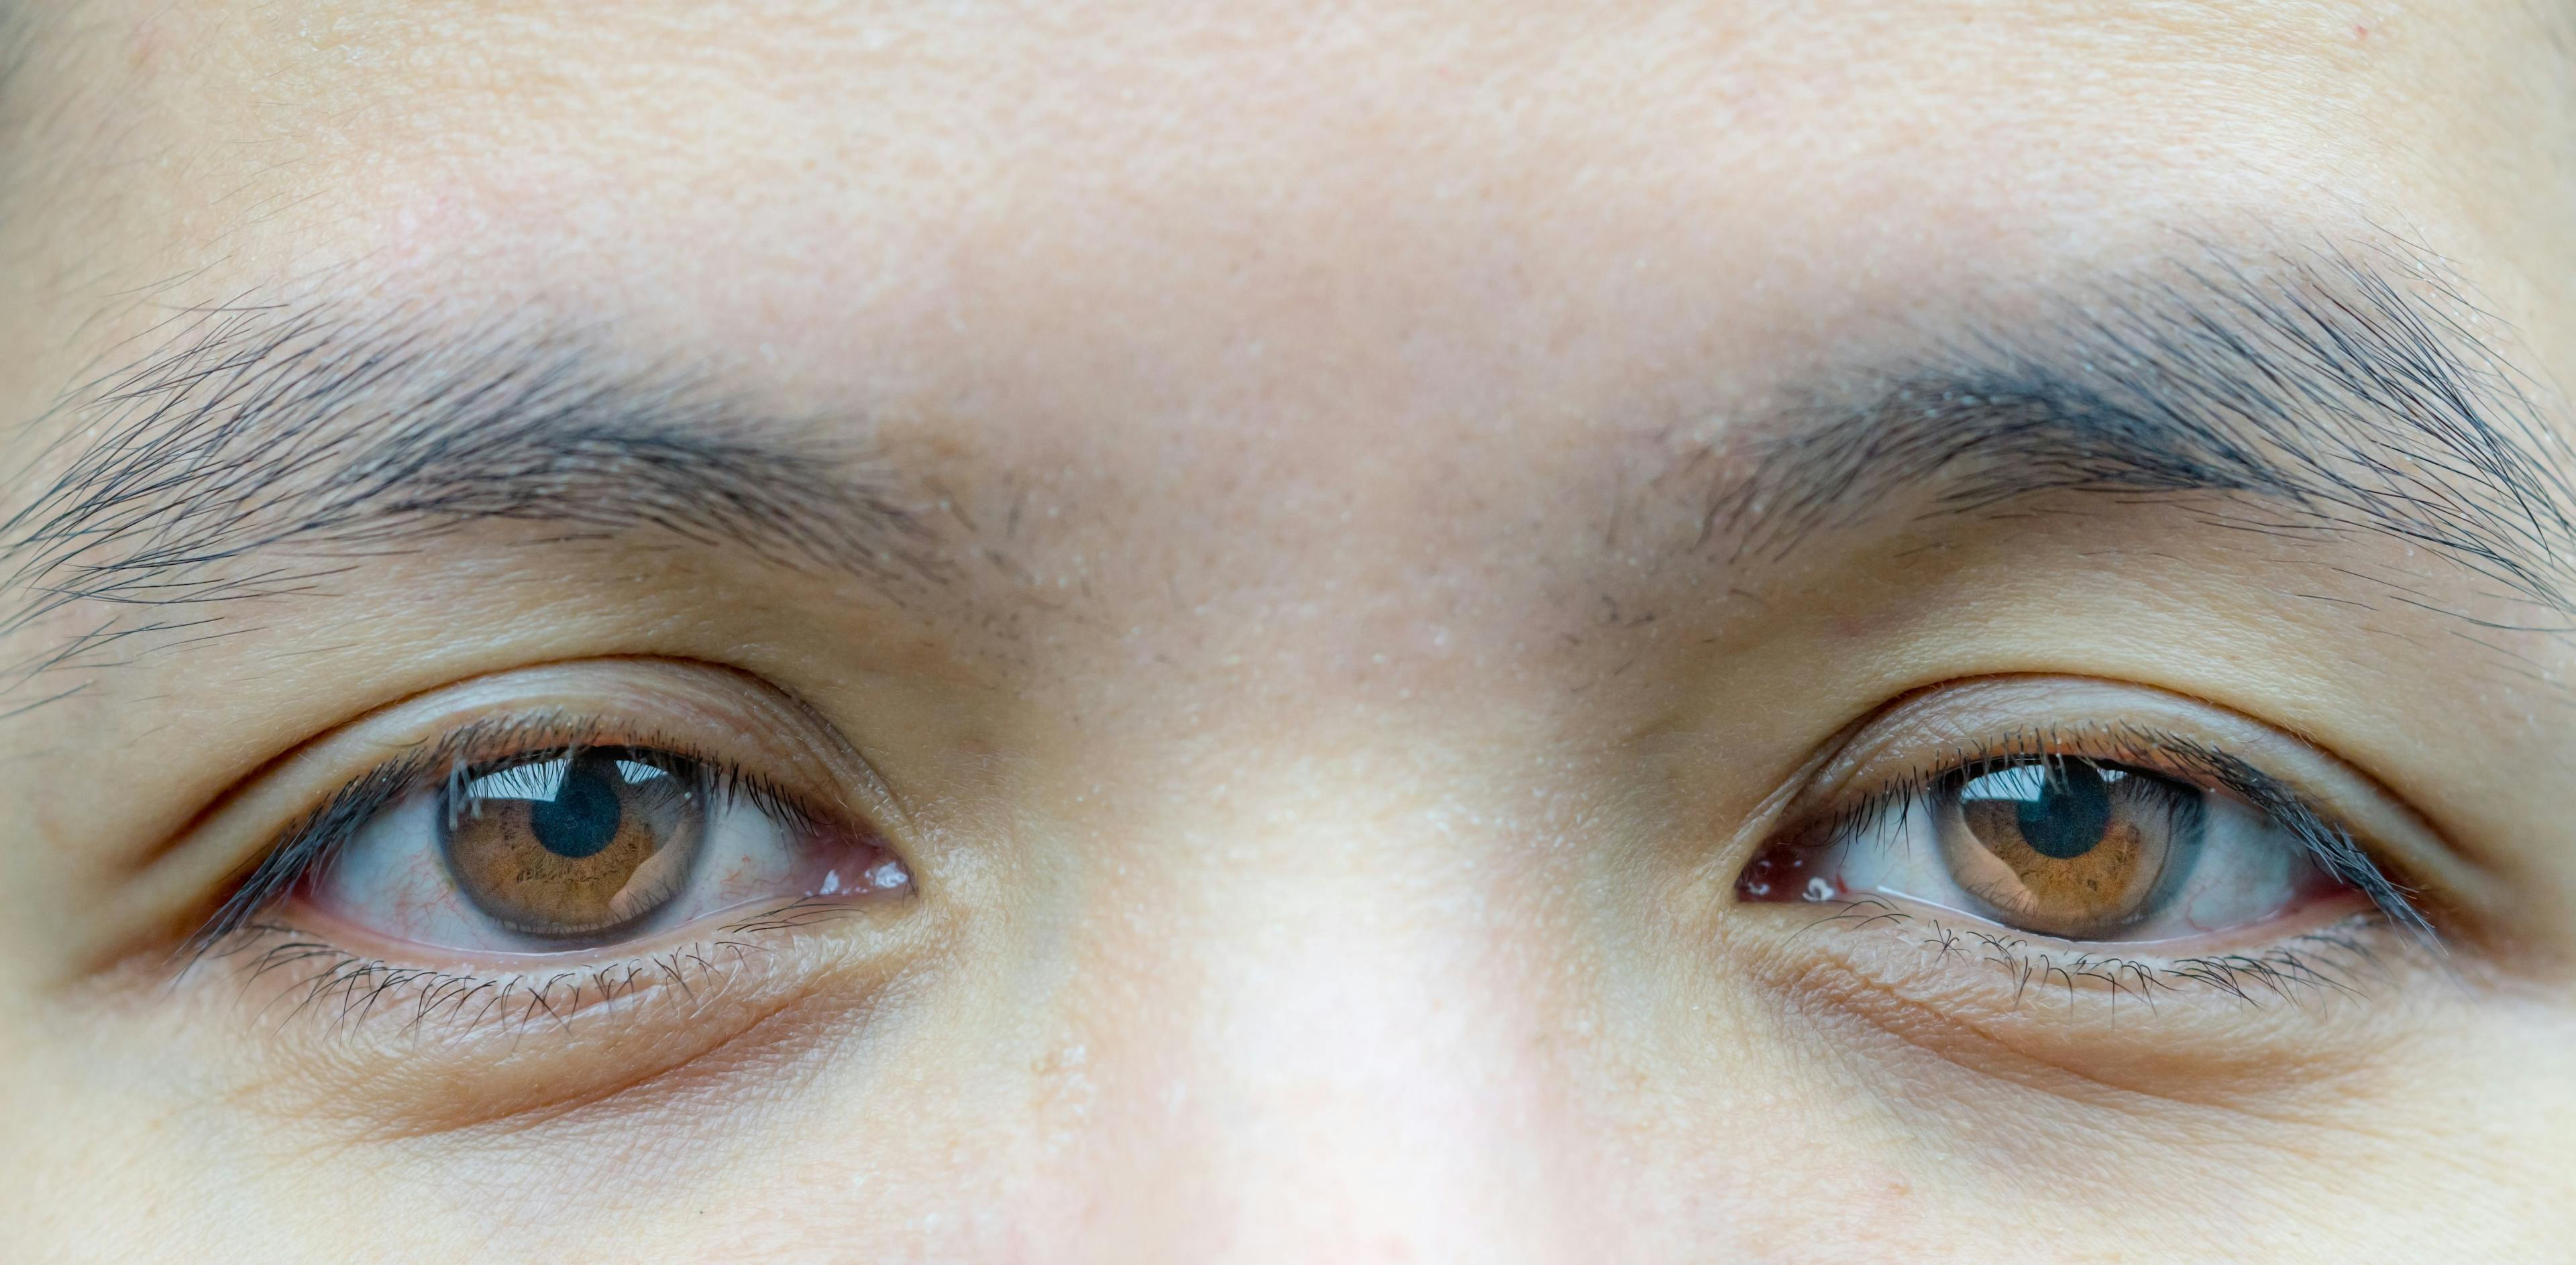 Anophthalmic ptosis and enucleation effects on upper eyelid function